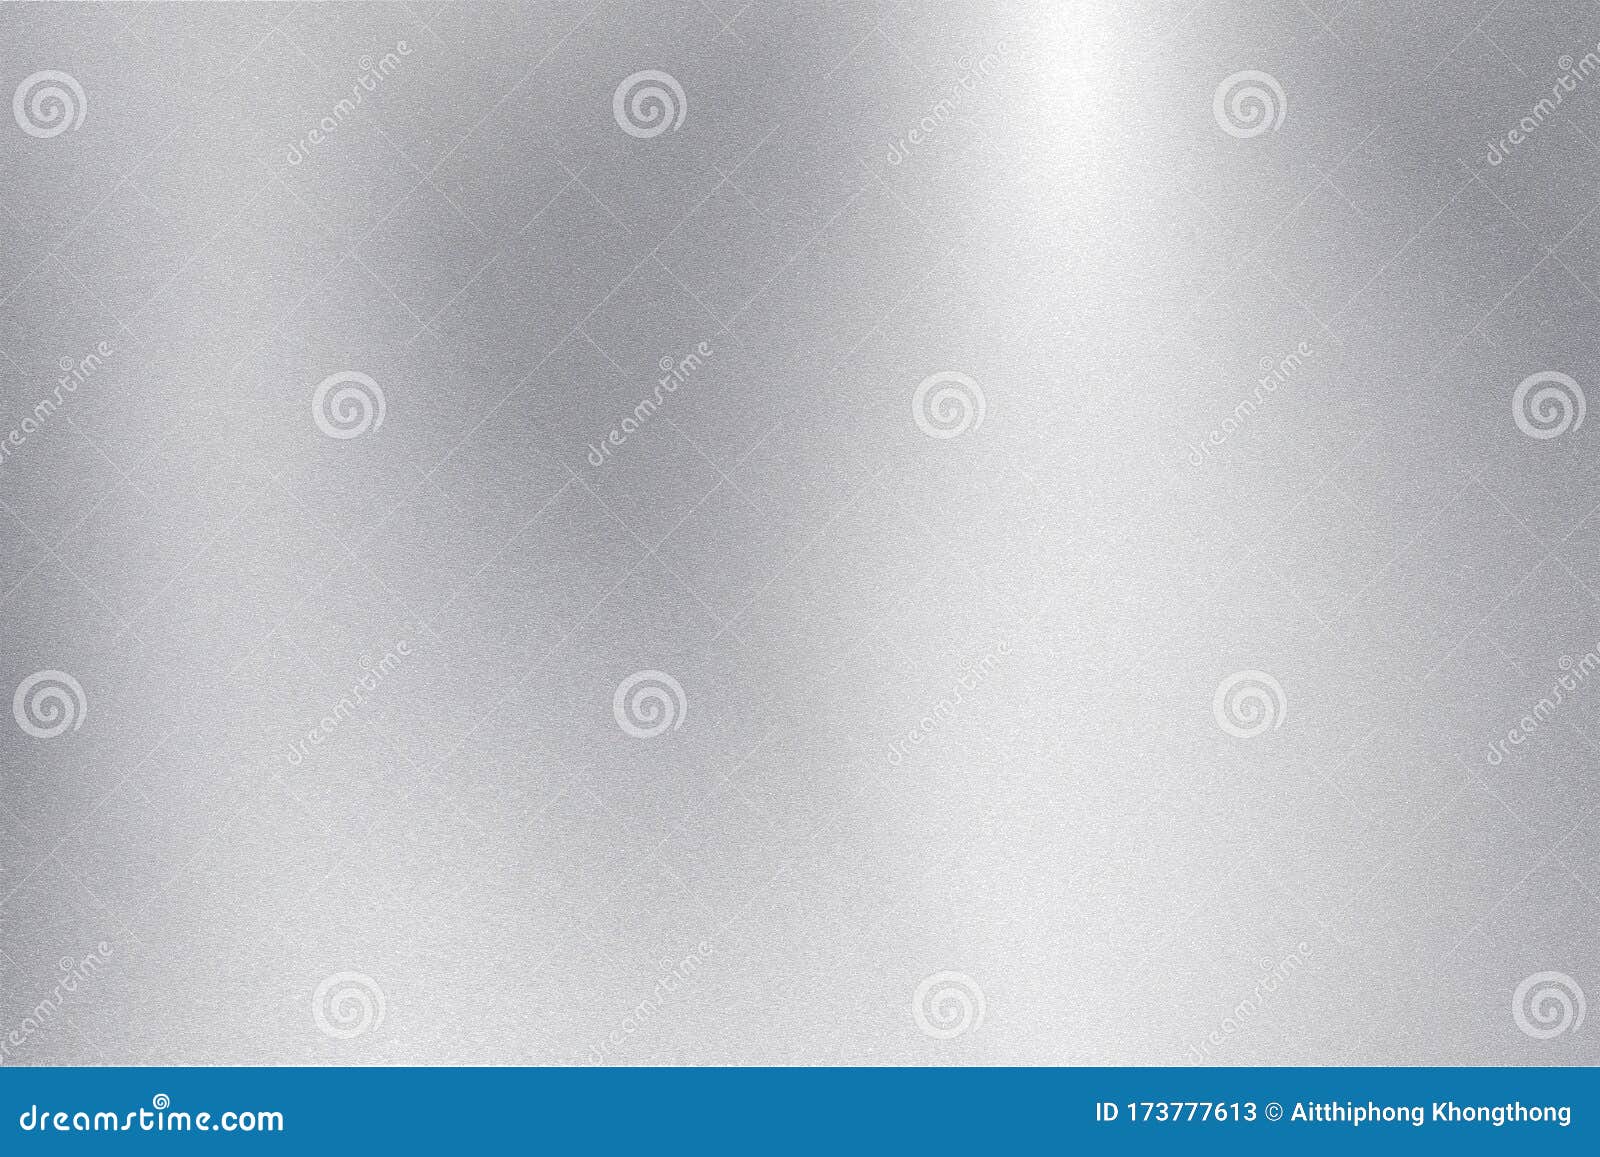 light shining down on silver foil metallic wall with copy space, abstract texture background